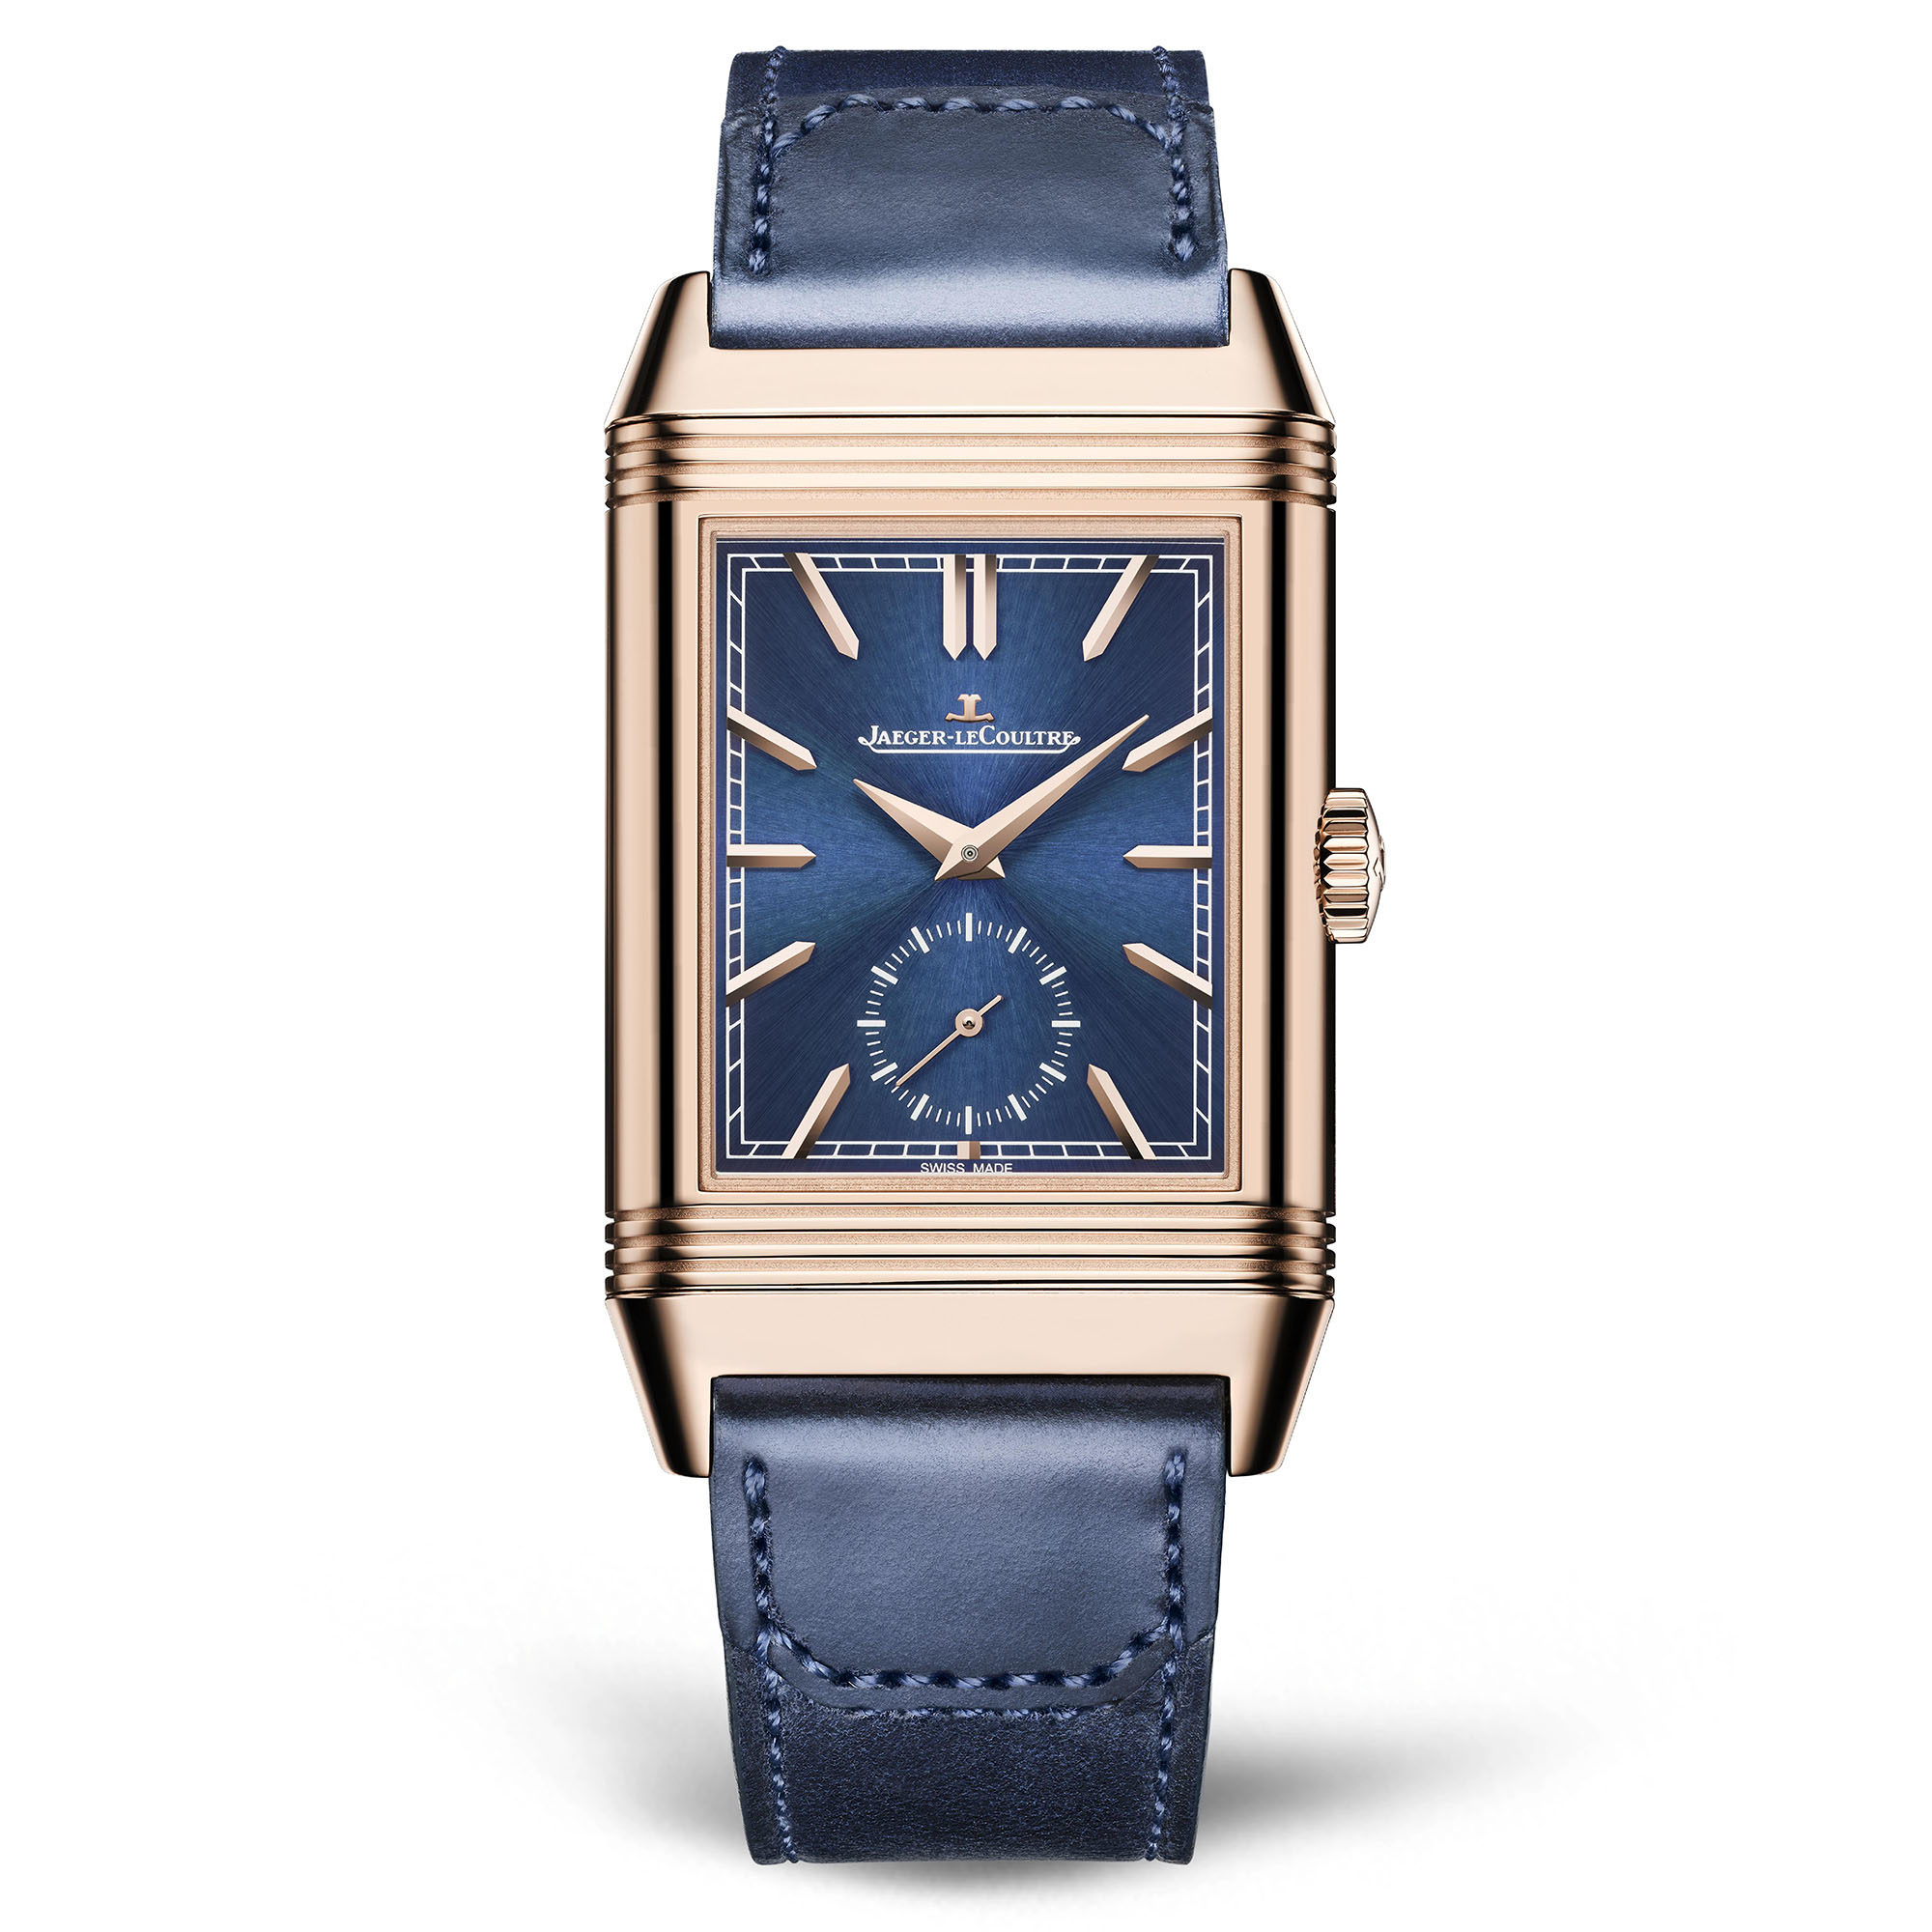 Jaeger-LeCoultre Reverso Tribute Duoface Fagliano Limited | Watchonista